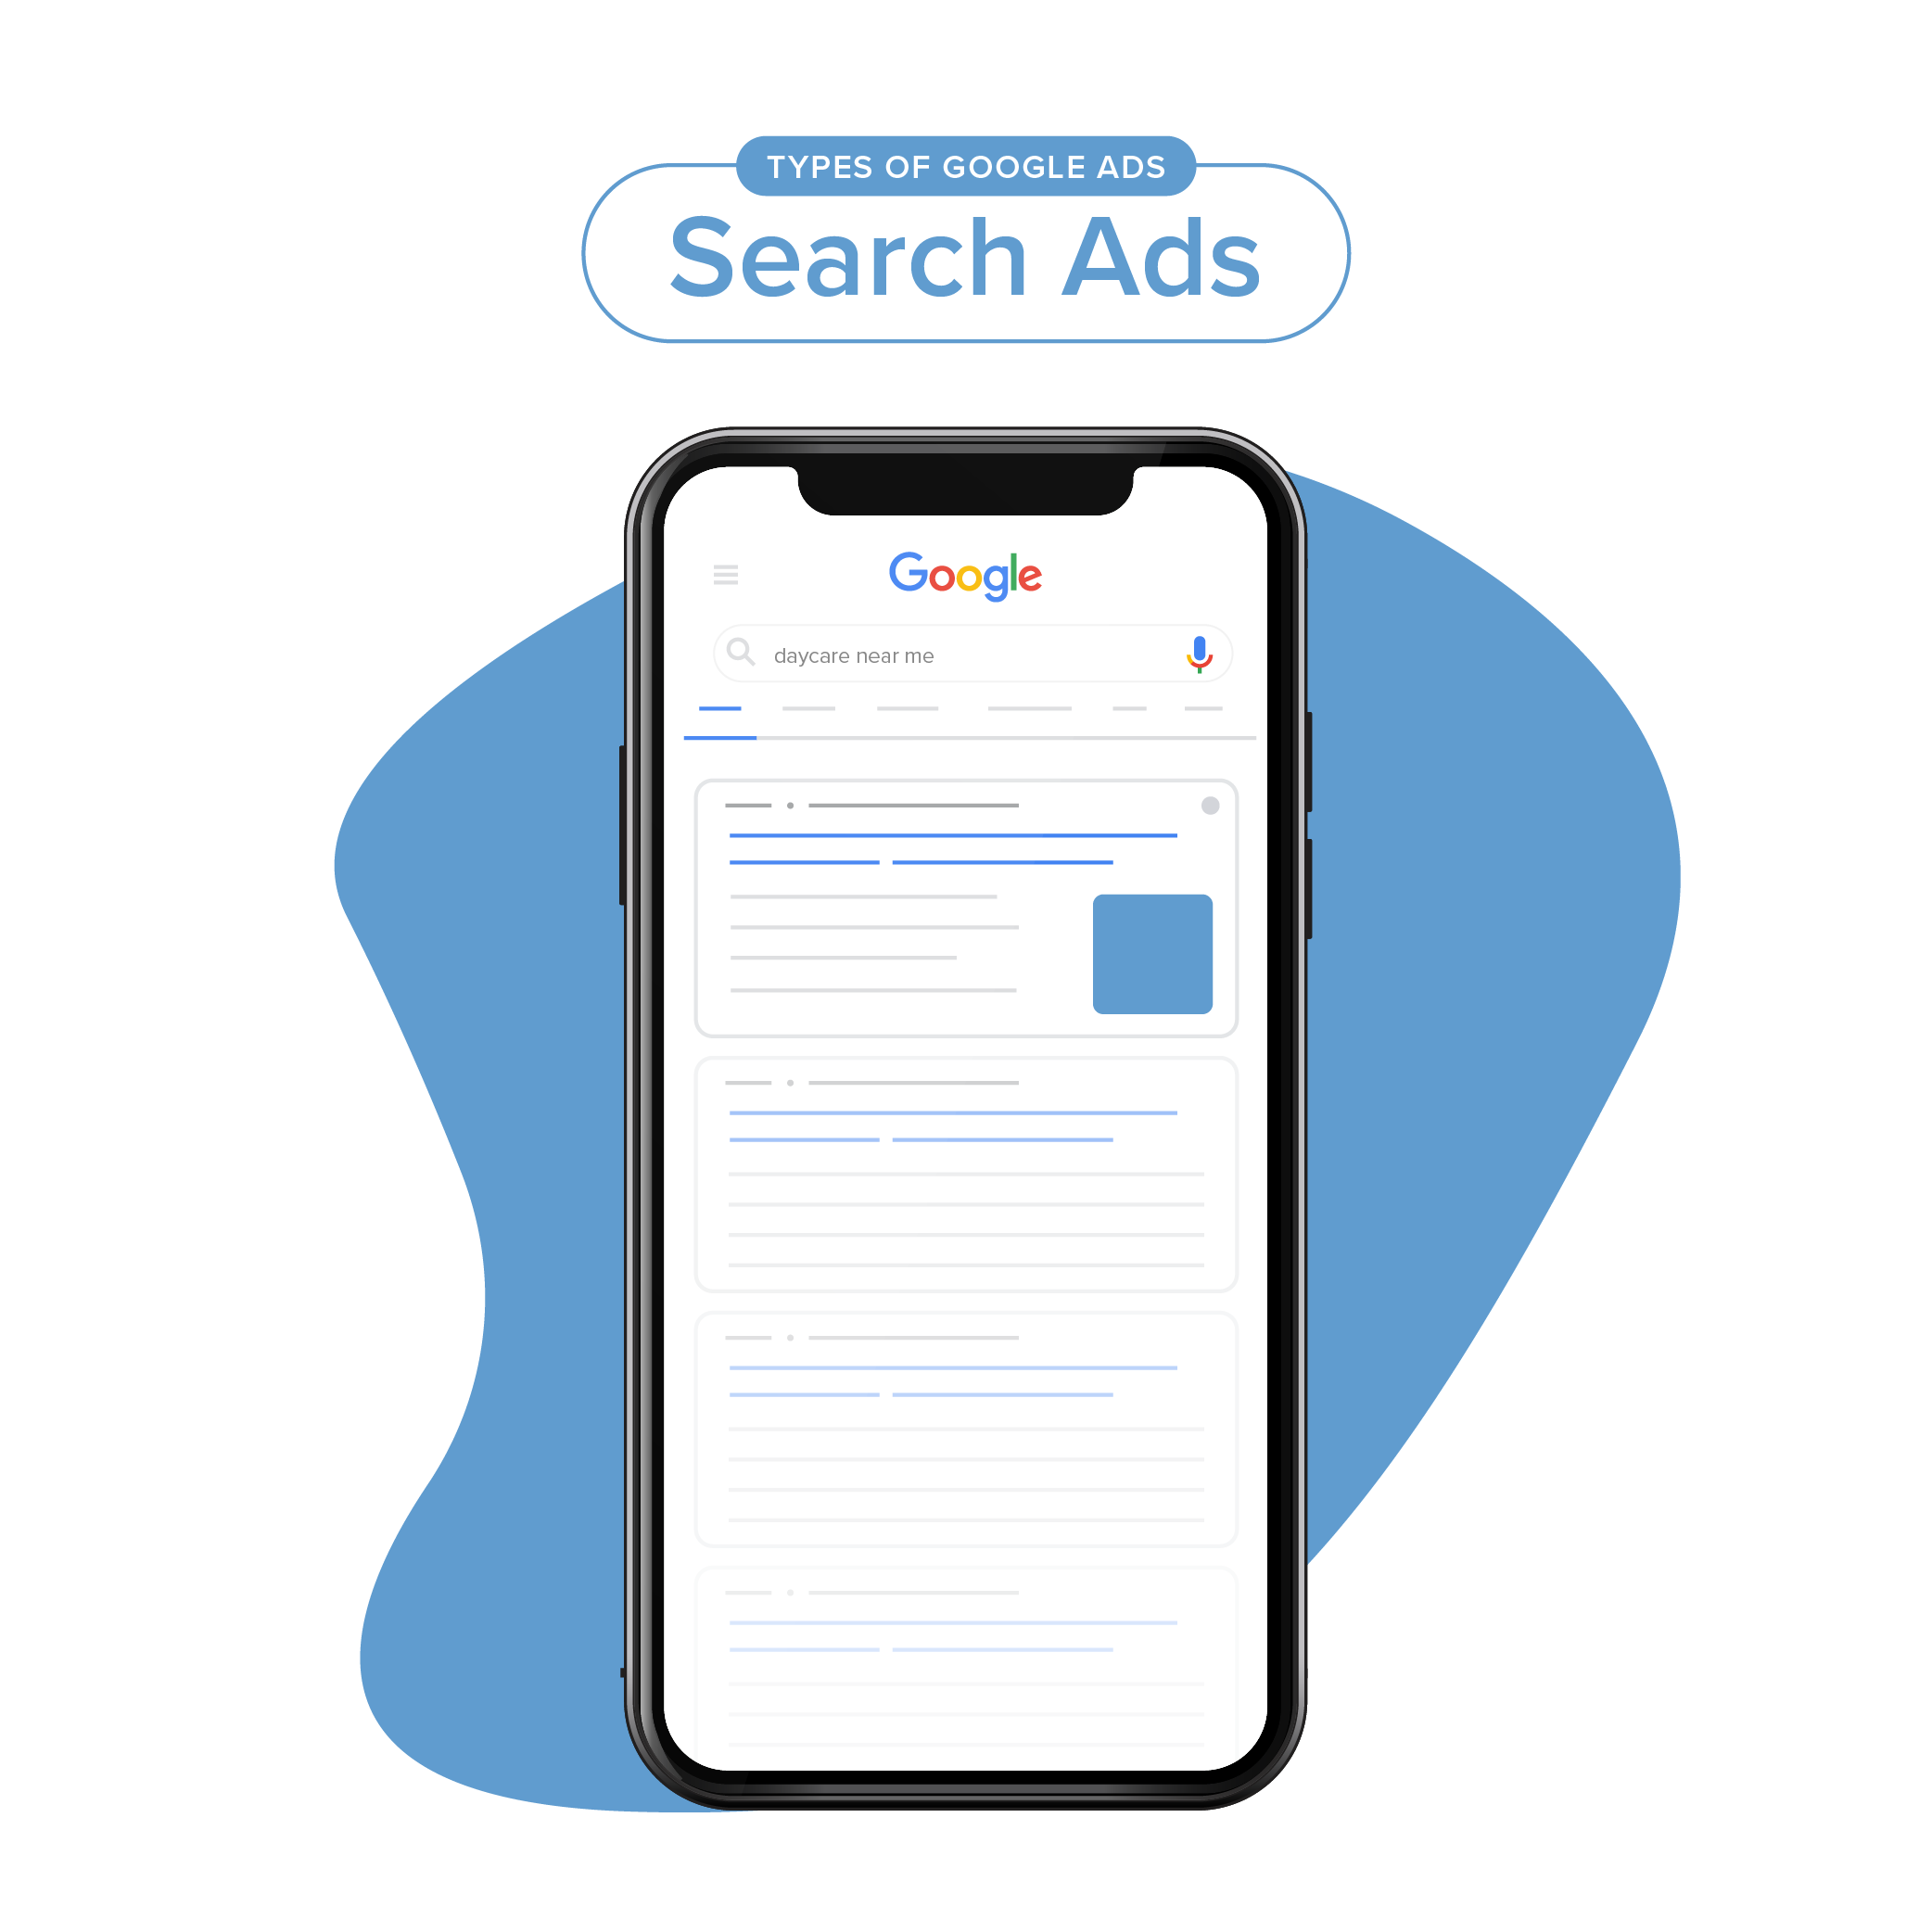 Google Ad Type: Search Ads